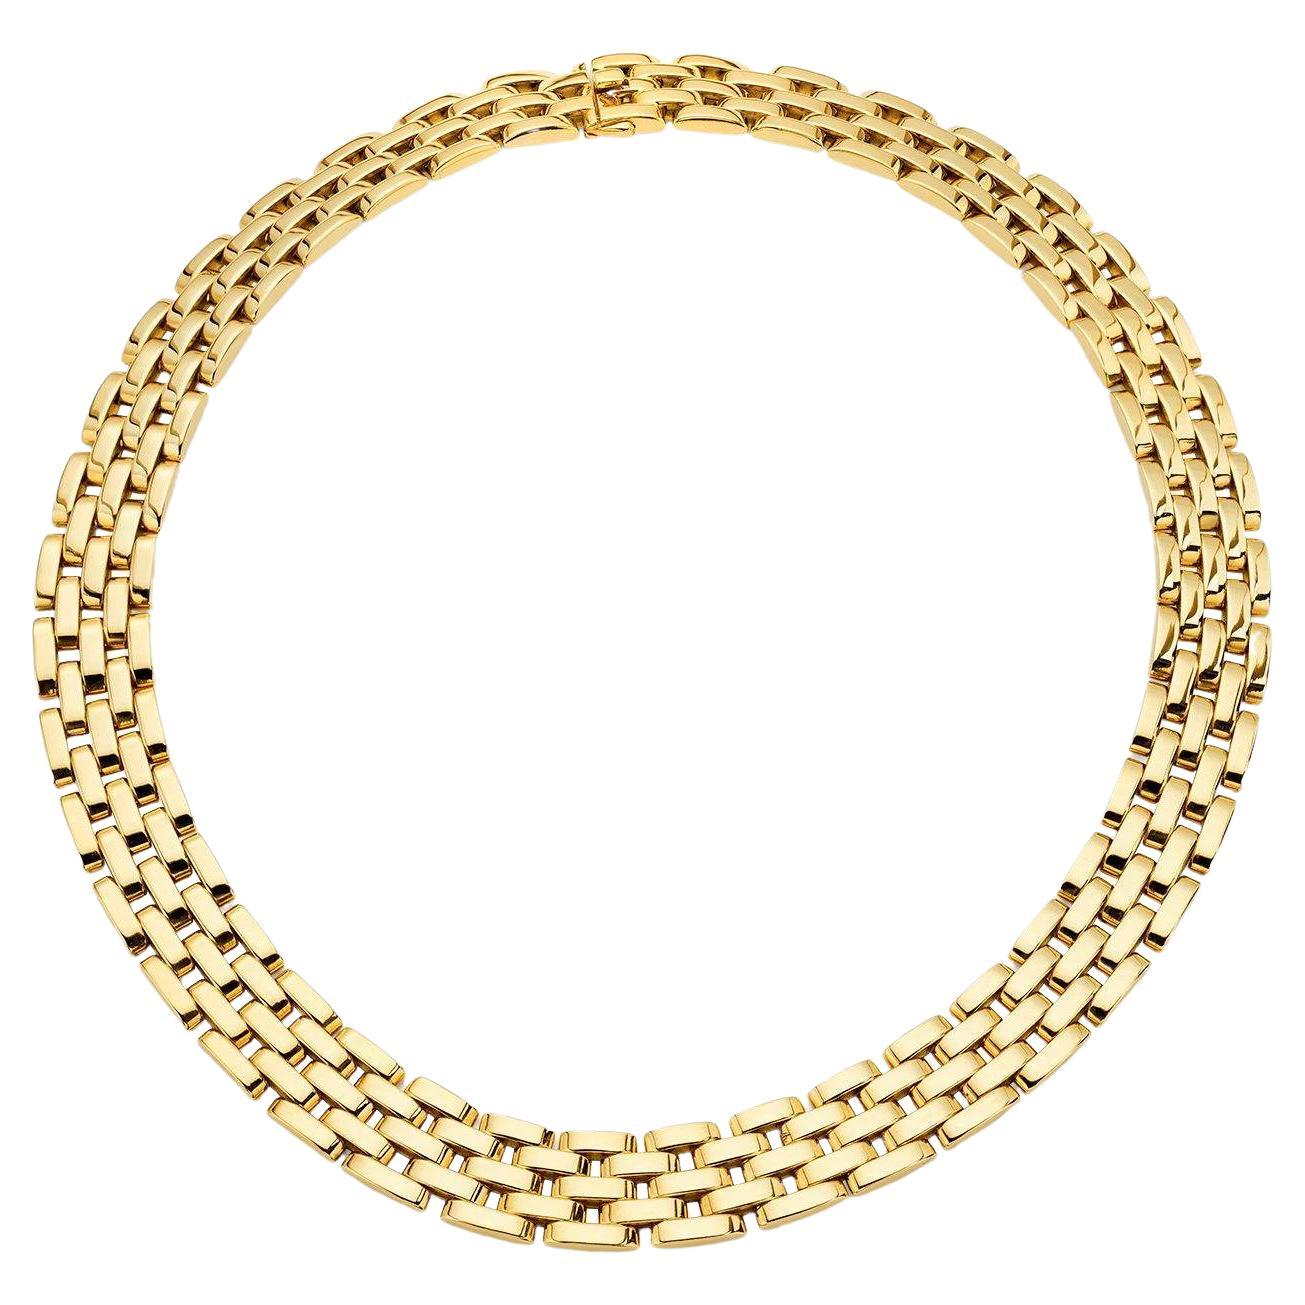 Cartier Maillon Panthere 5 Row Necklace in 18K Yellow Gold